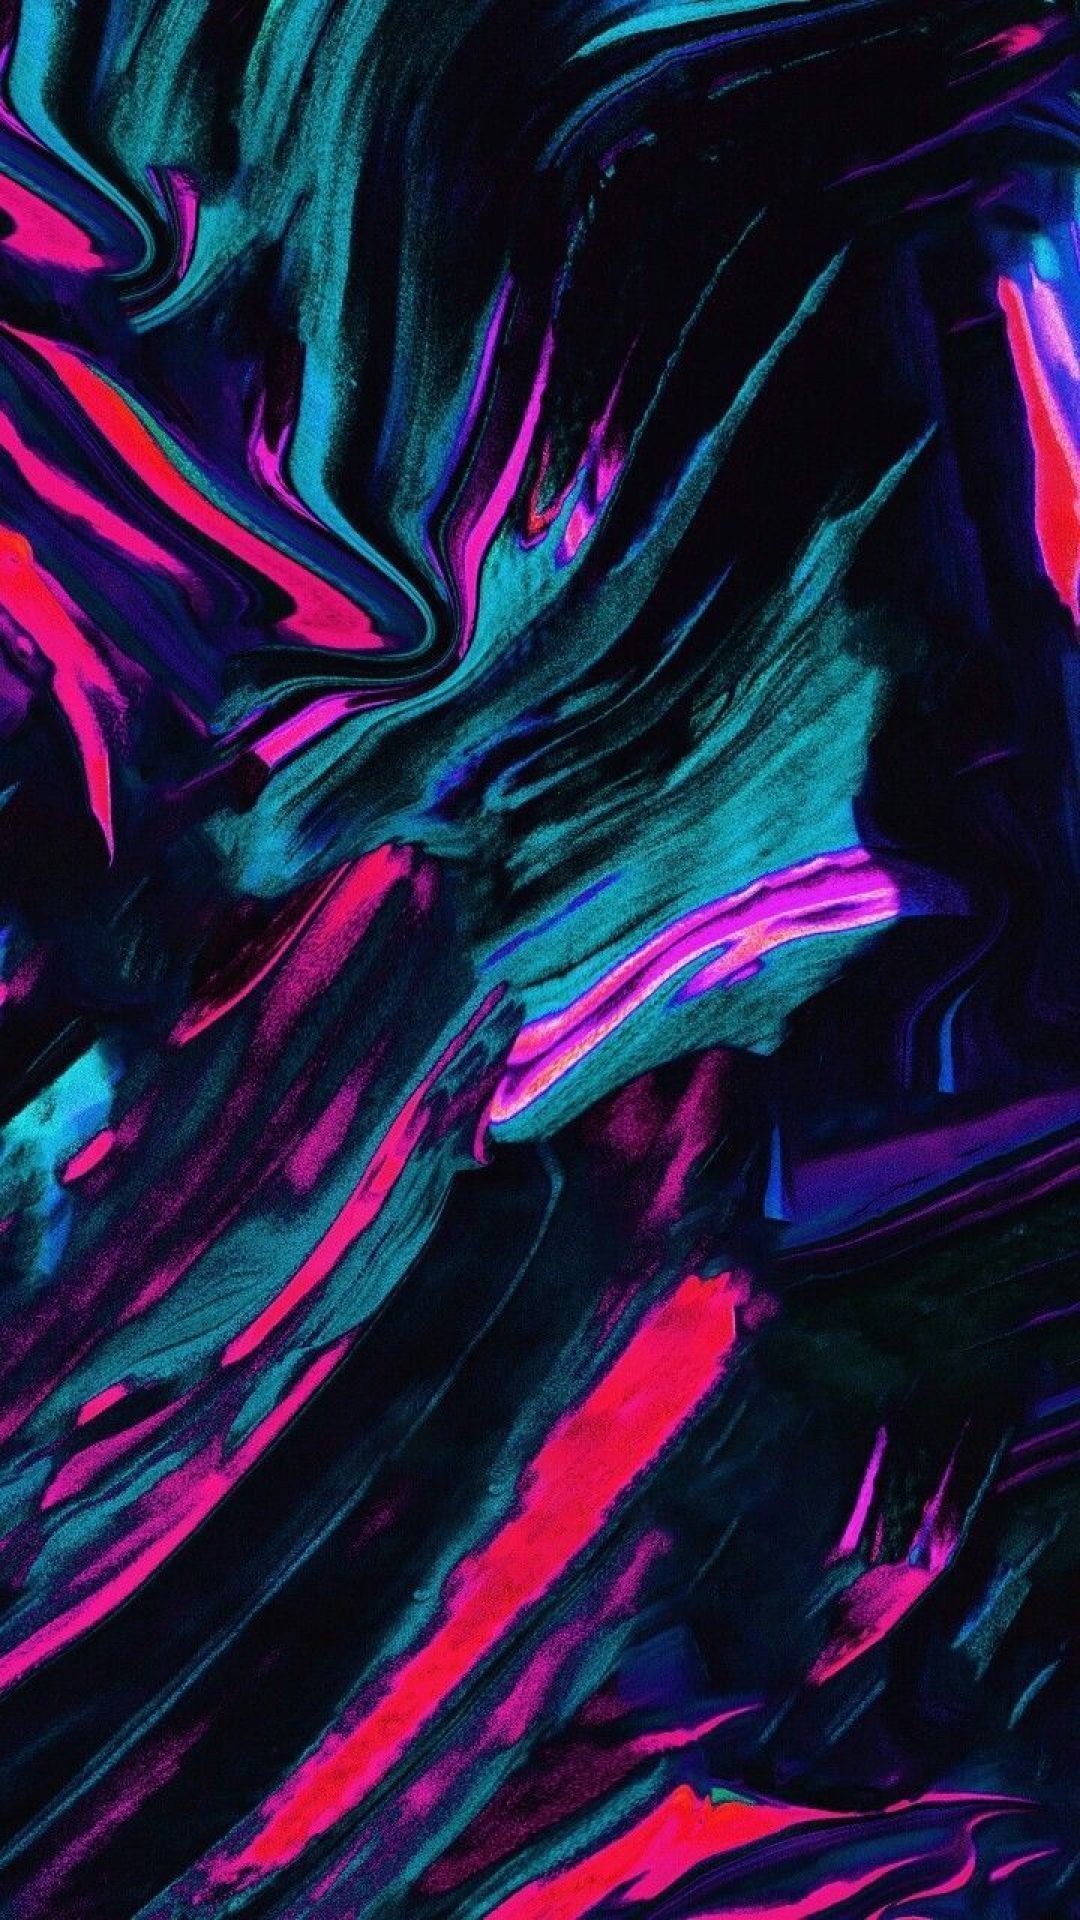 3D ABSTRACT IMAGES HD PHOTOS 1080P. Abstract iphone wallpaper, Abstract wallpaper, Neon wallpaper